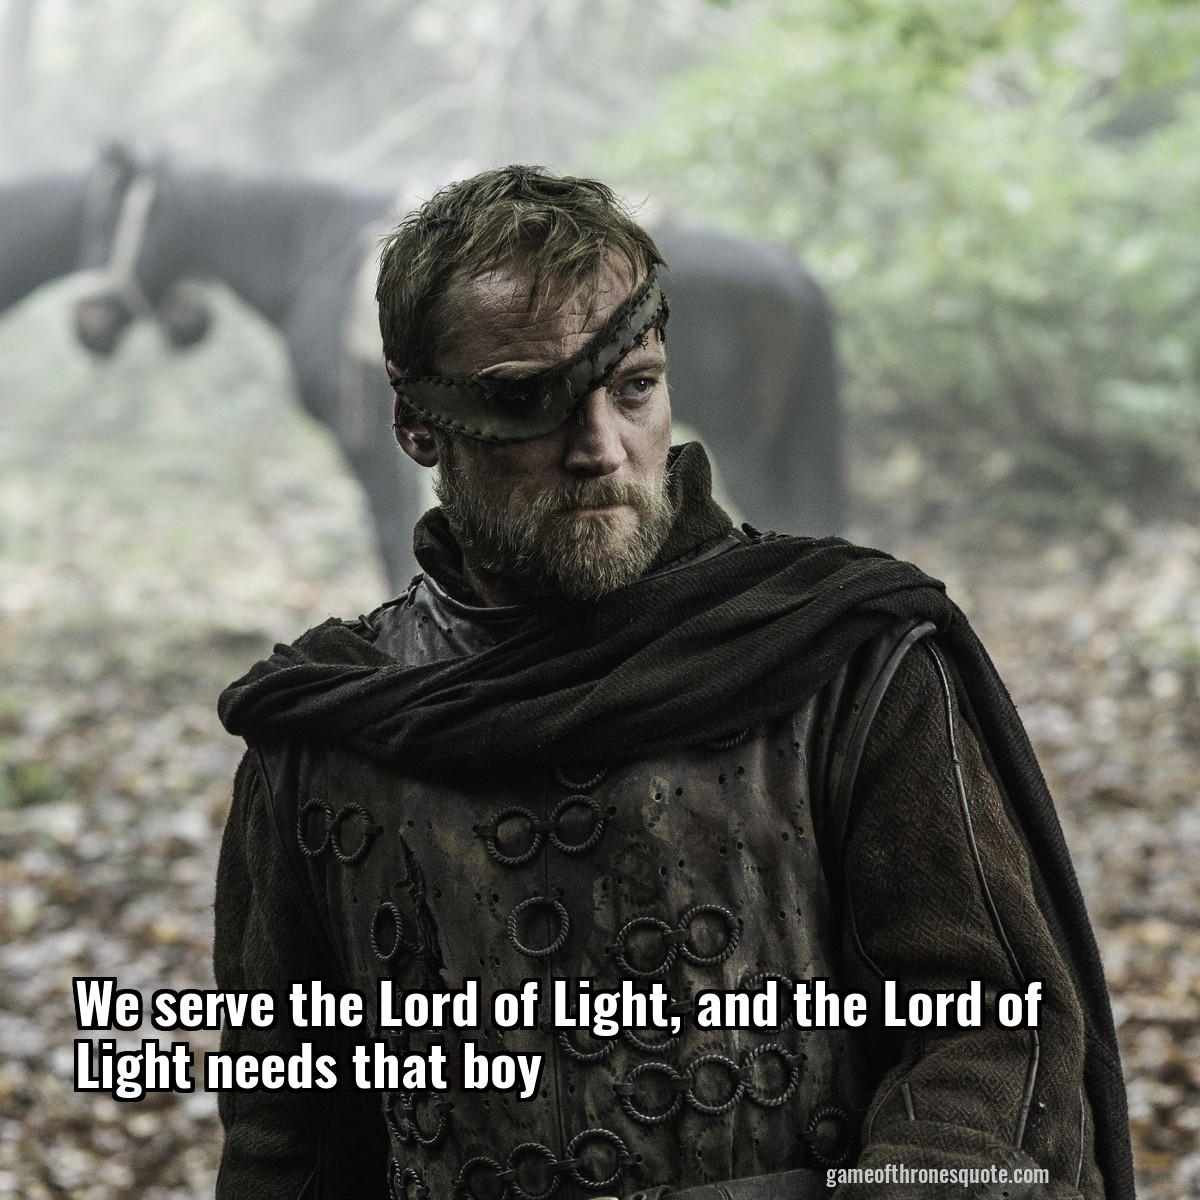 We serve the Lord of Light, and the Lord of Light needs that boy